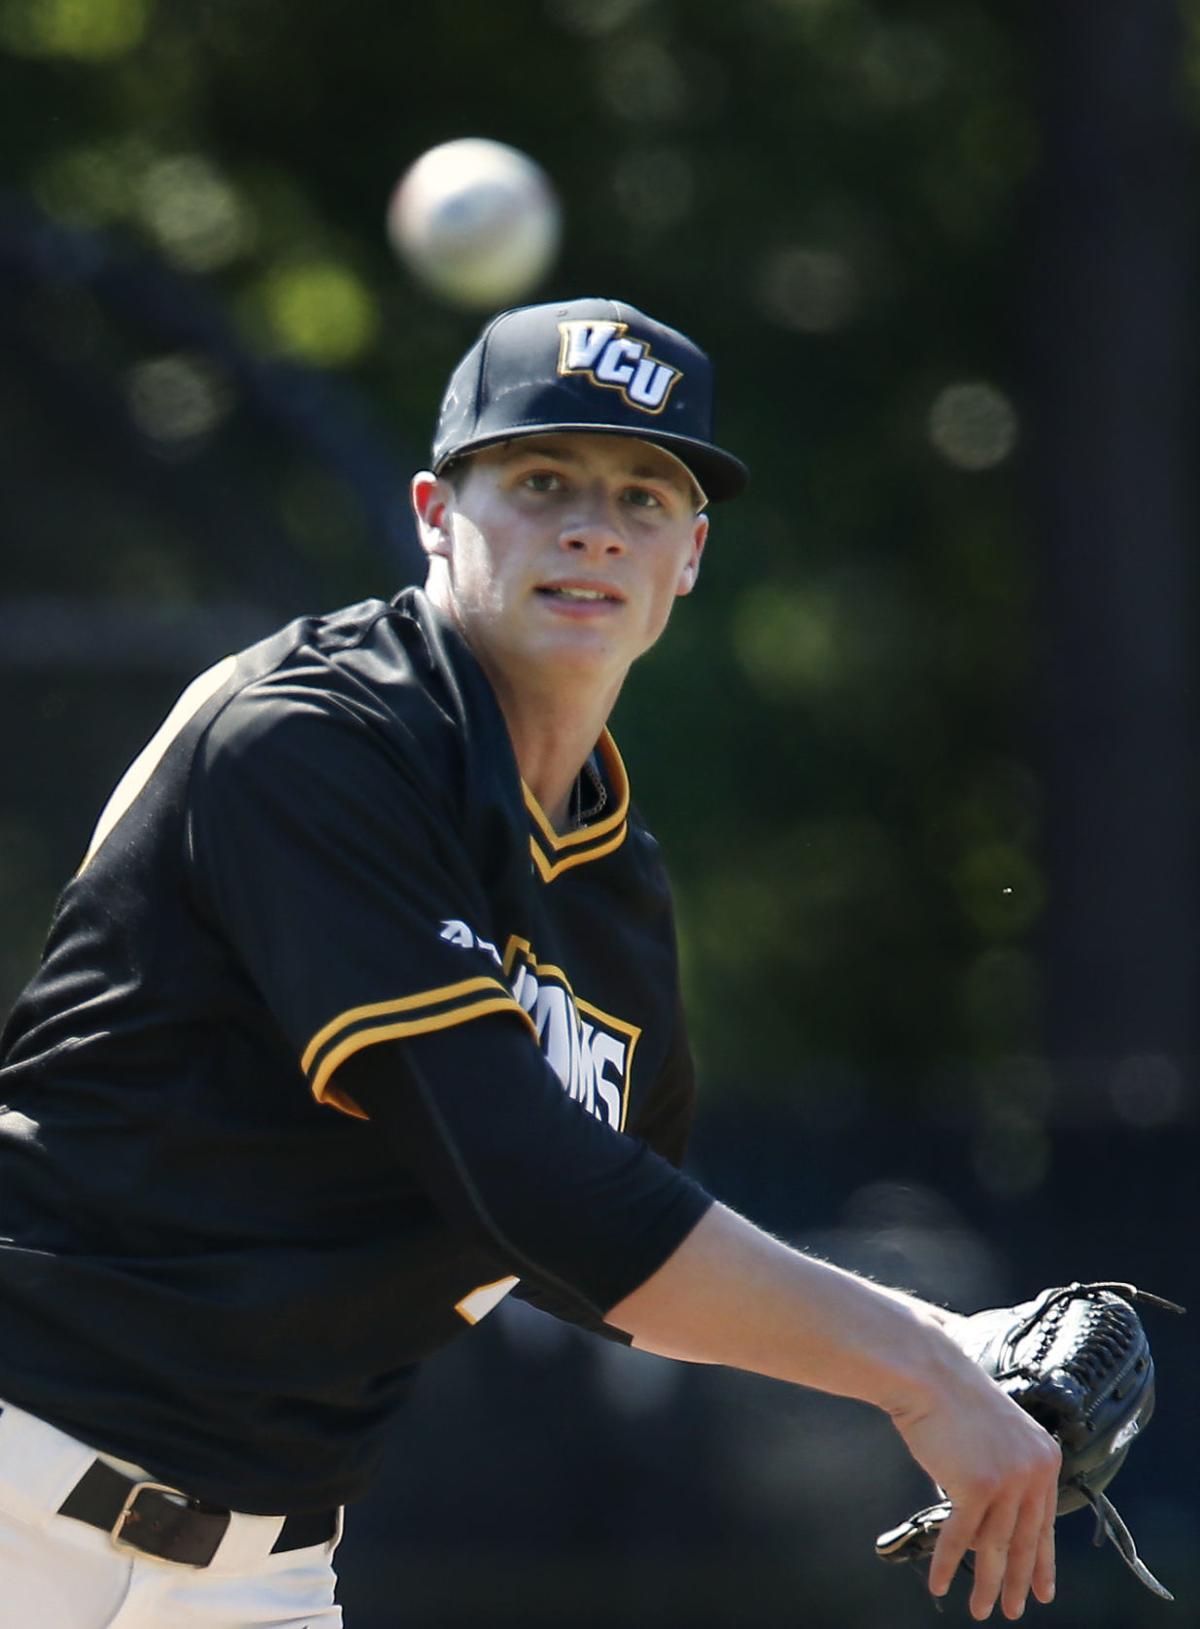 Despite some big losses, VCU baseball looks to build on foundation of